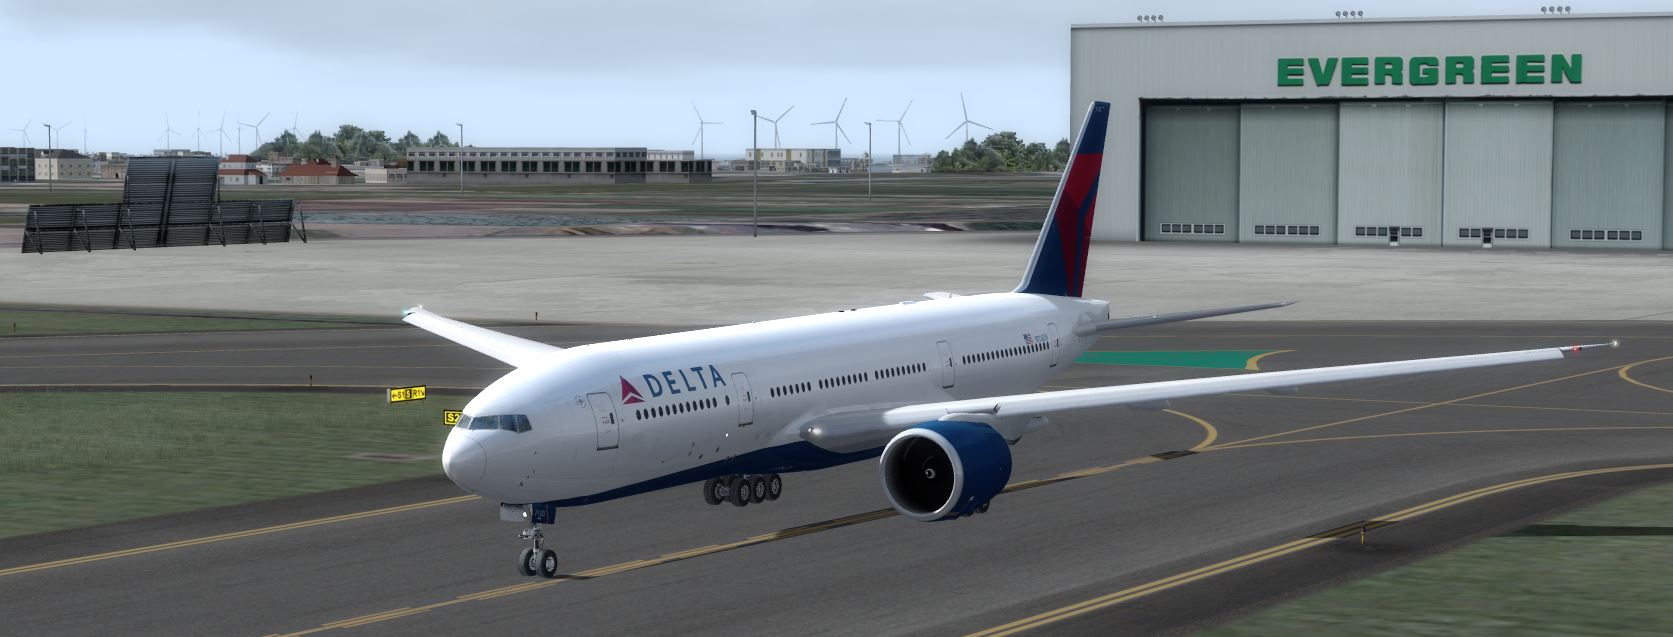 B777-200 Delta Airlines Standard Livery-4319 